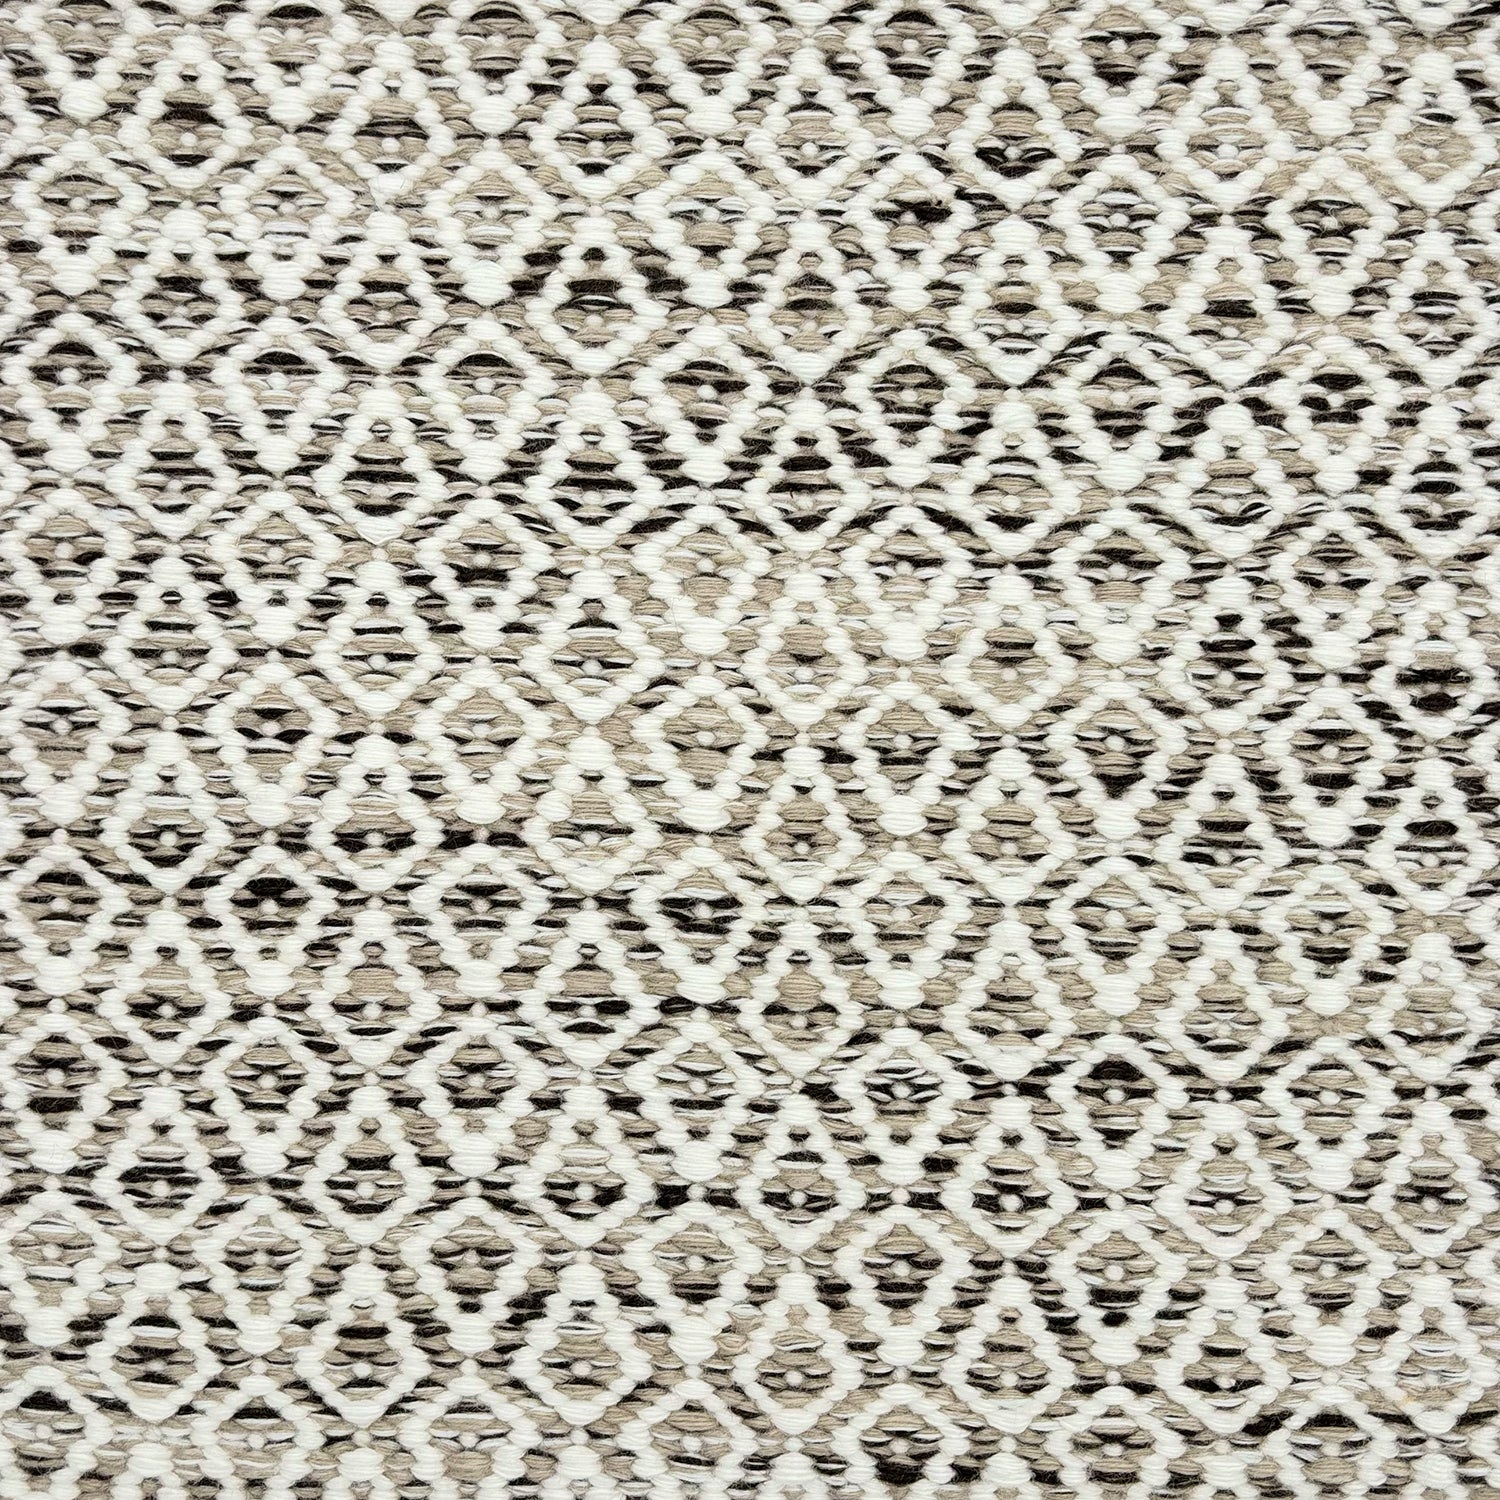 Detail of a handowven rug in an diamond like pattern in white and beige with grey accents.